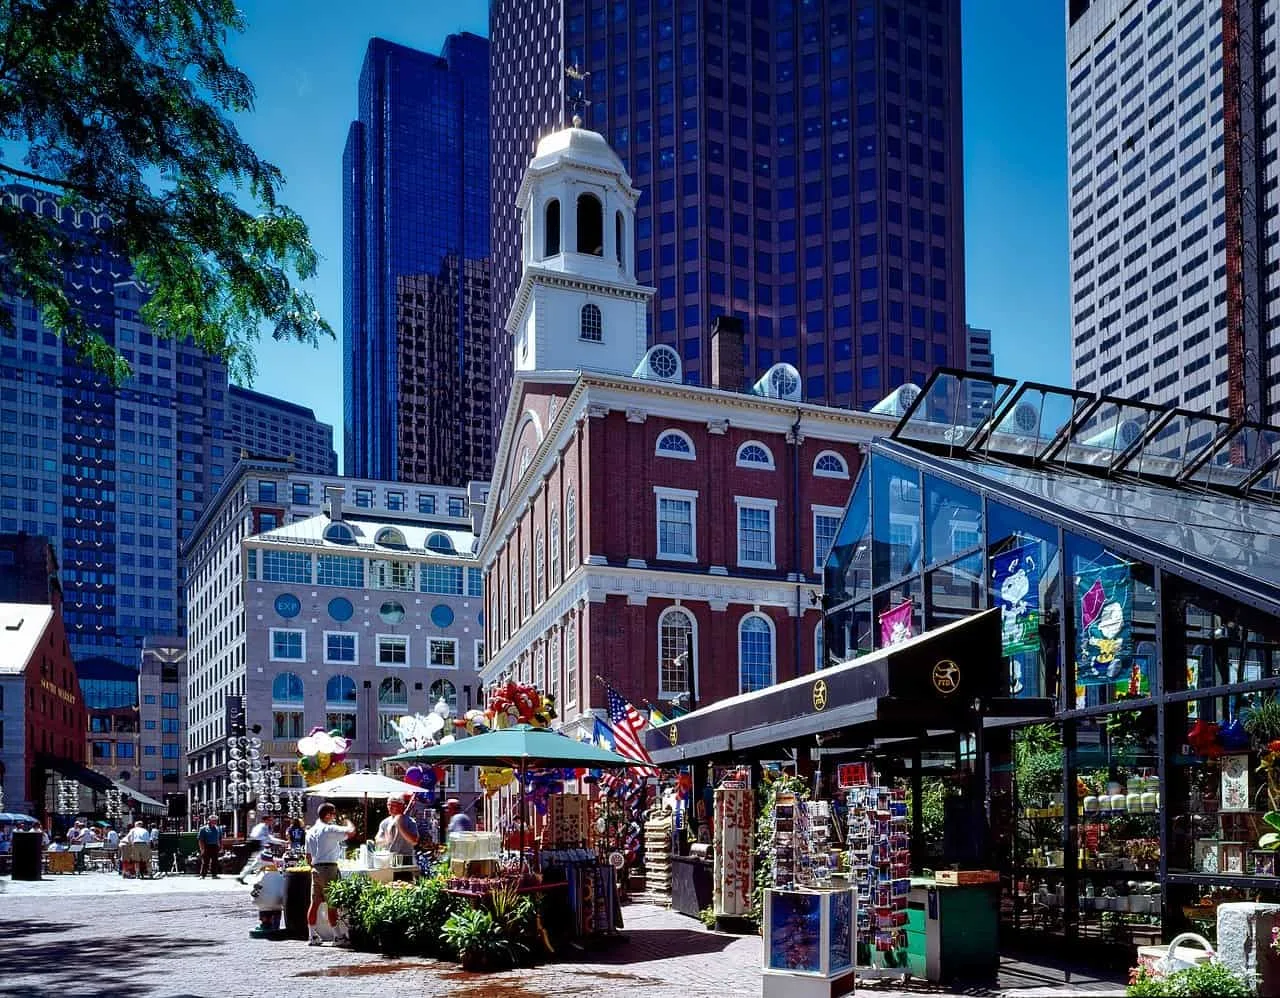 Faneuil Hall and Quincy Market are great places to visit in Boston